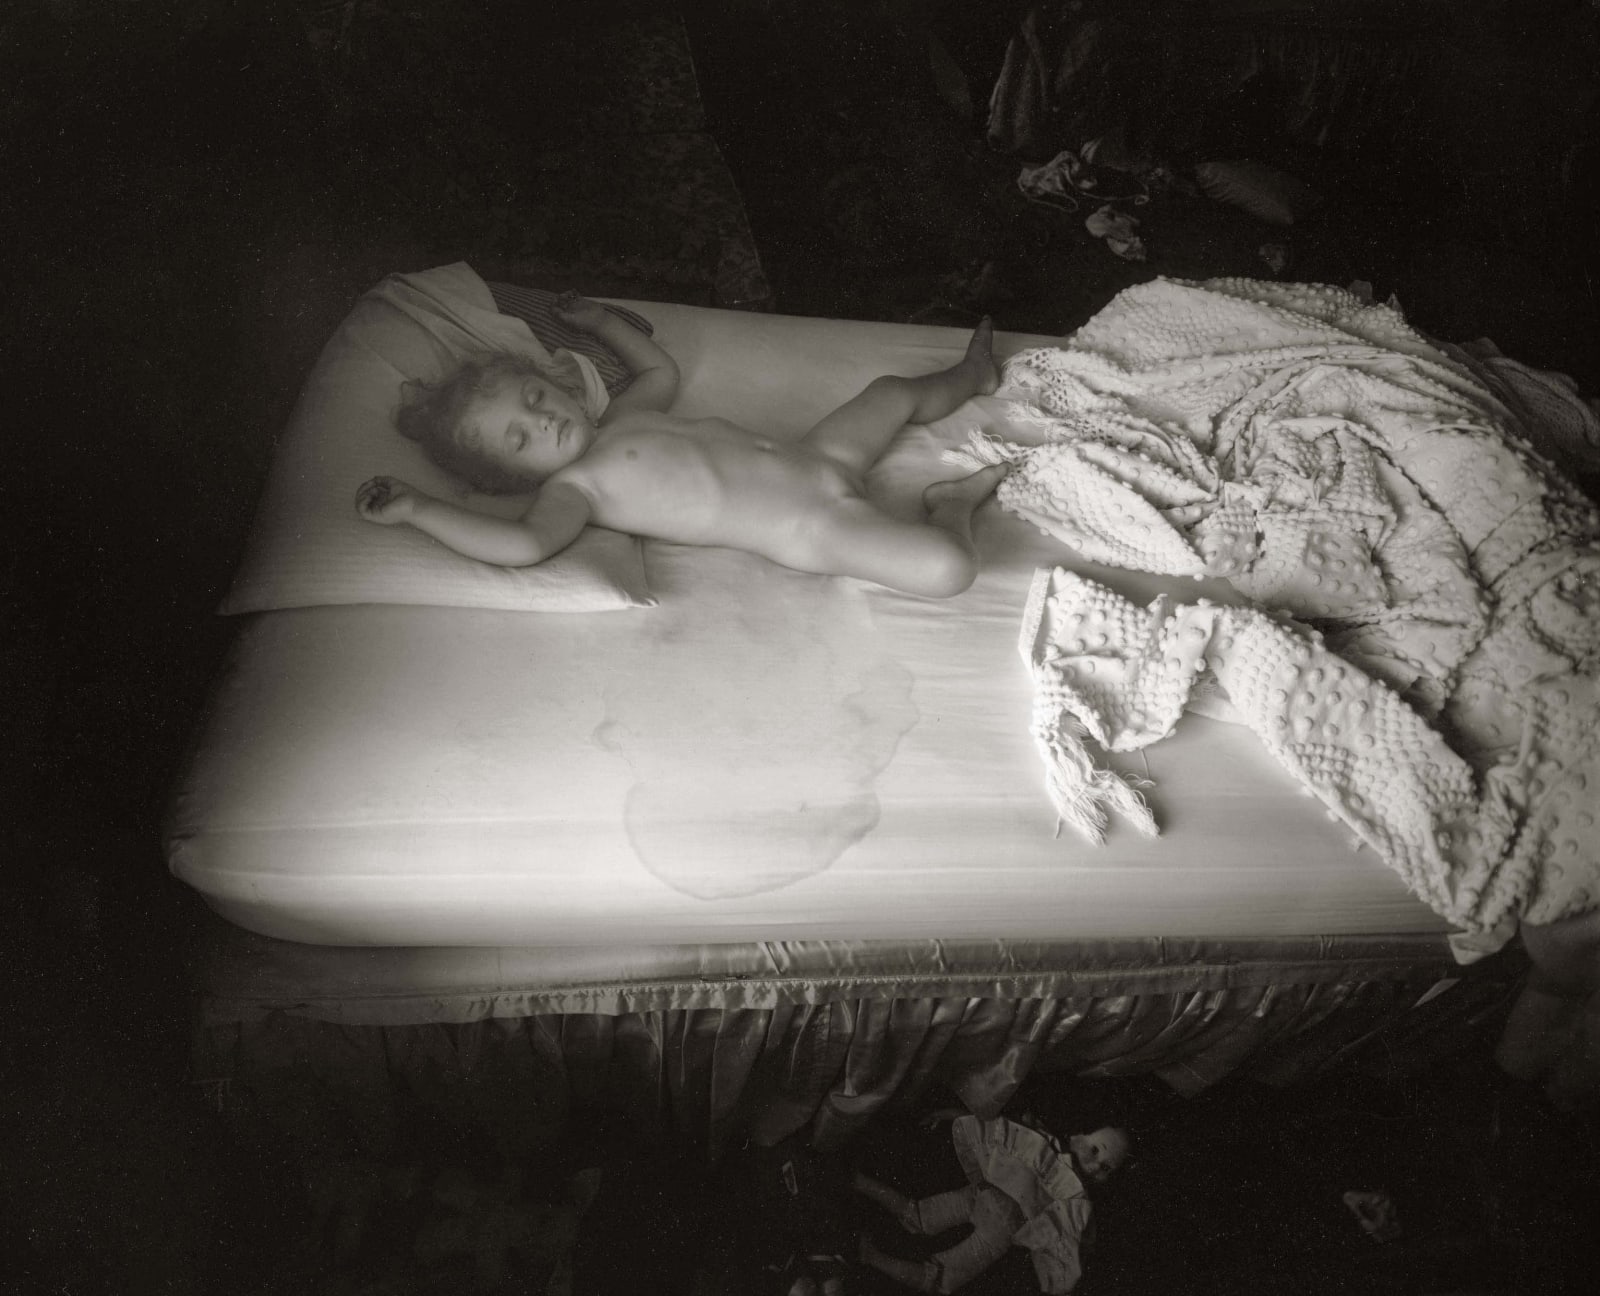 Virginia sleeping with wet bed stains and dolls on floor, from the Immediate Family series by Sally Mann